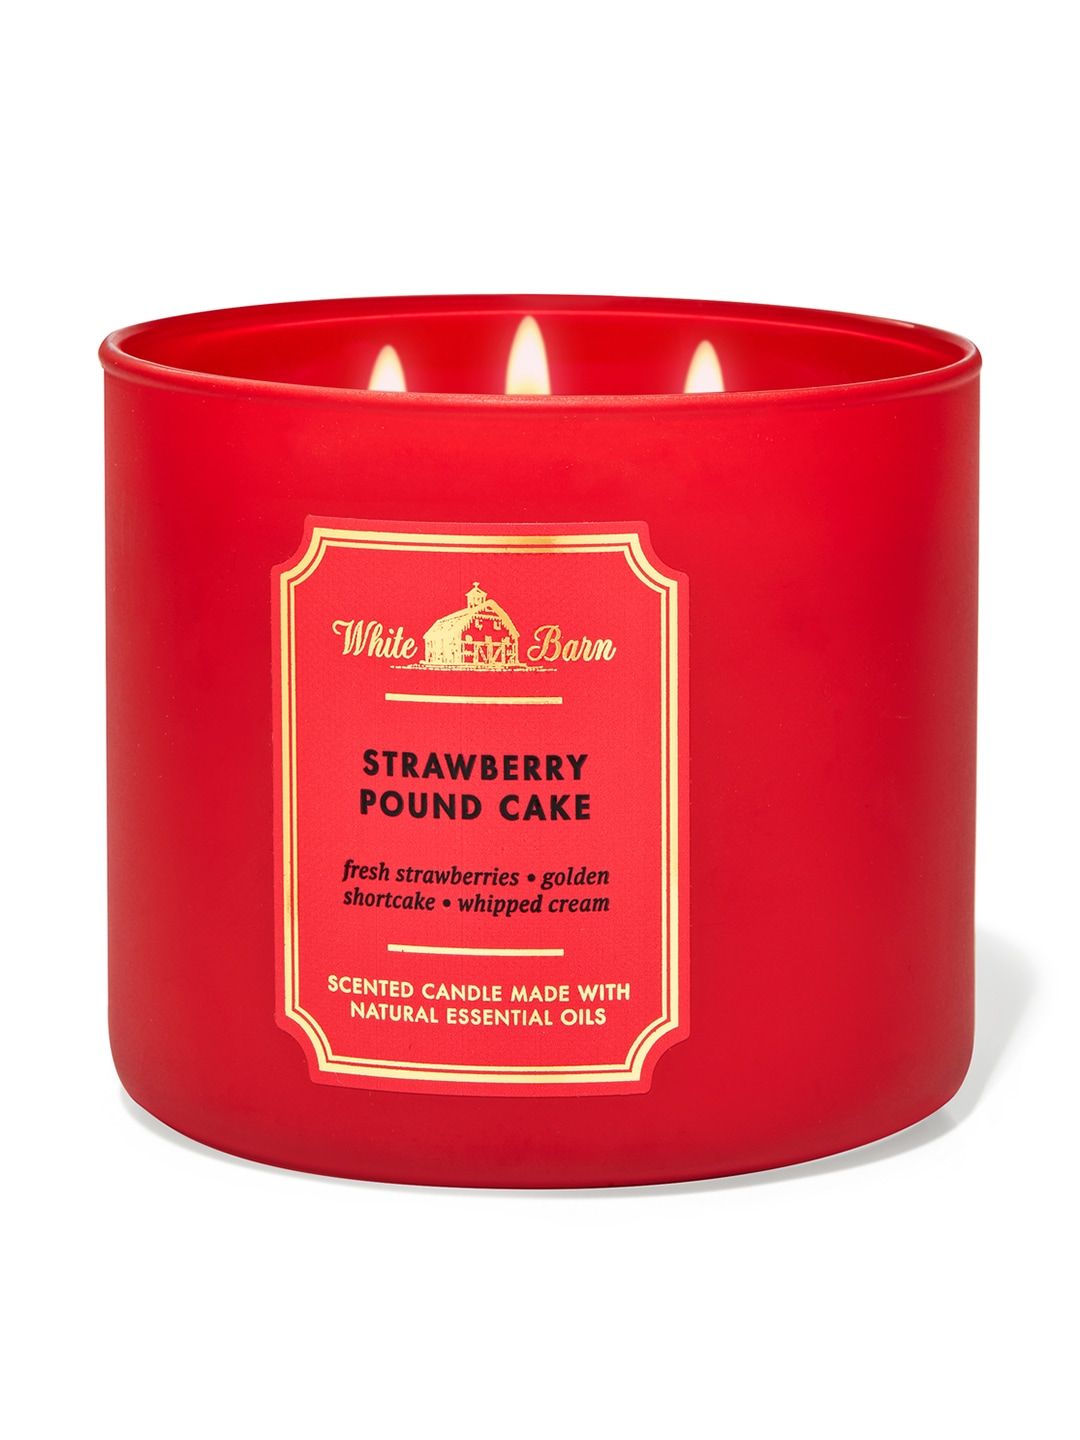 Bath & Body Works Strawberry Pound Cake 3-Wick Scented Candle - 411g Price in India